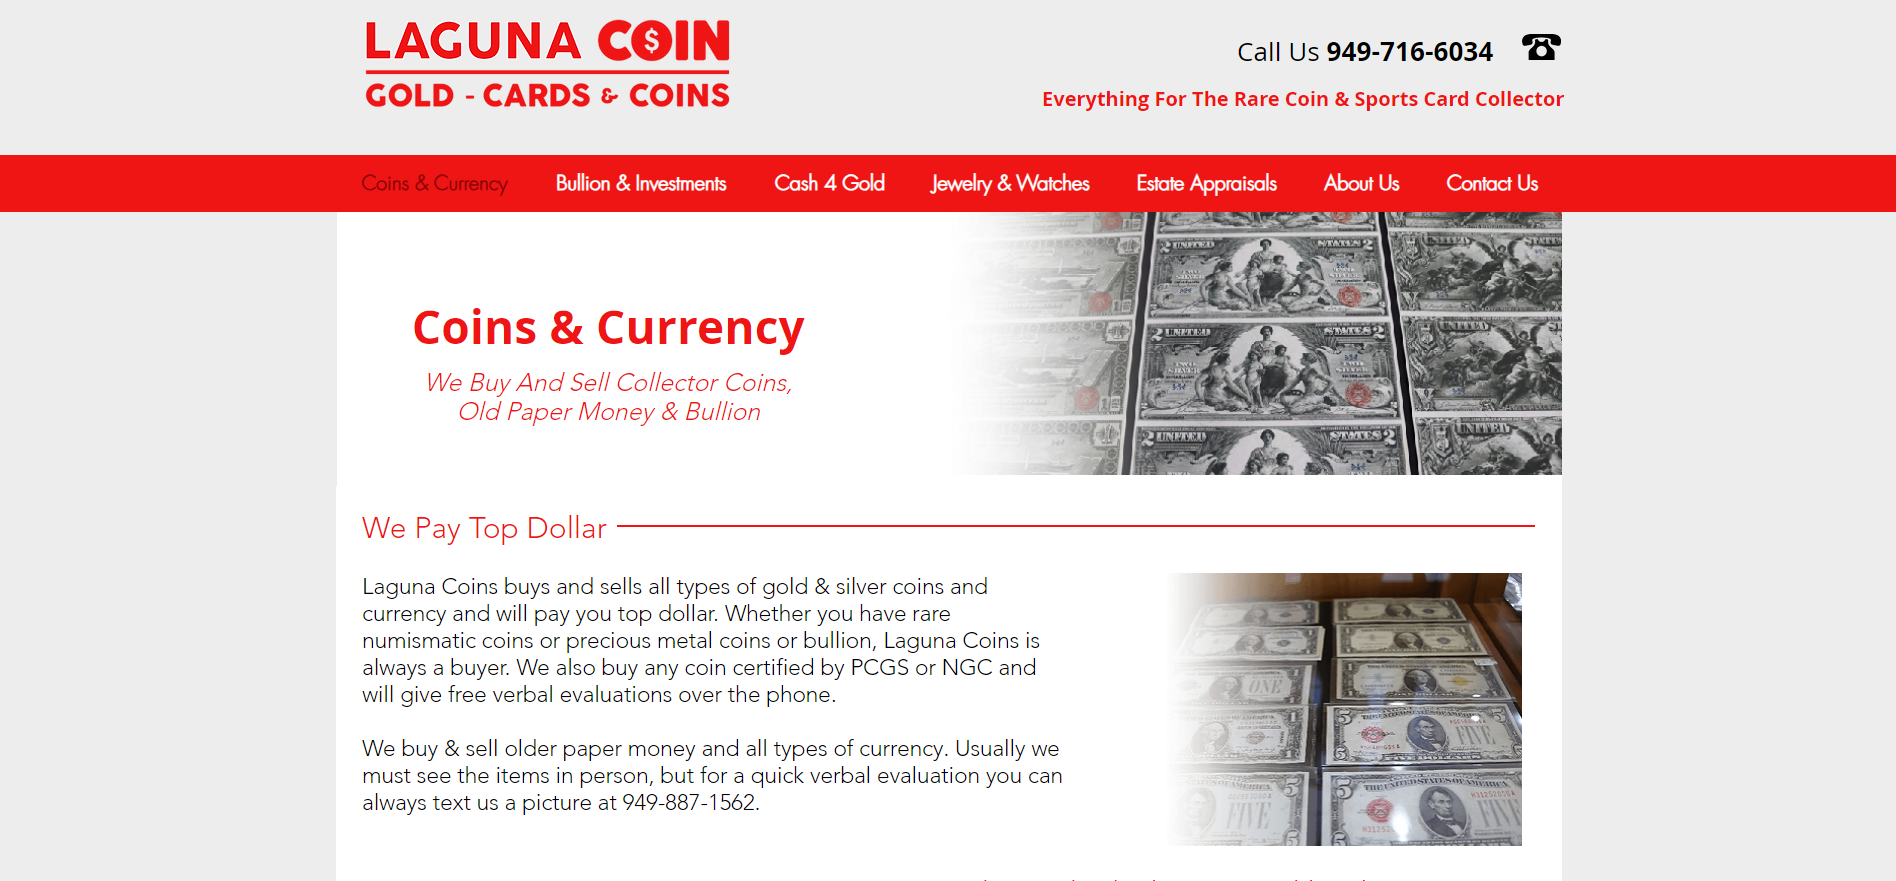 laguna coin gold ira review products and services